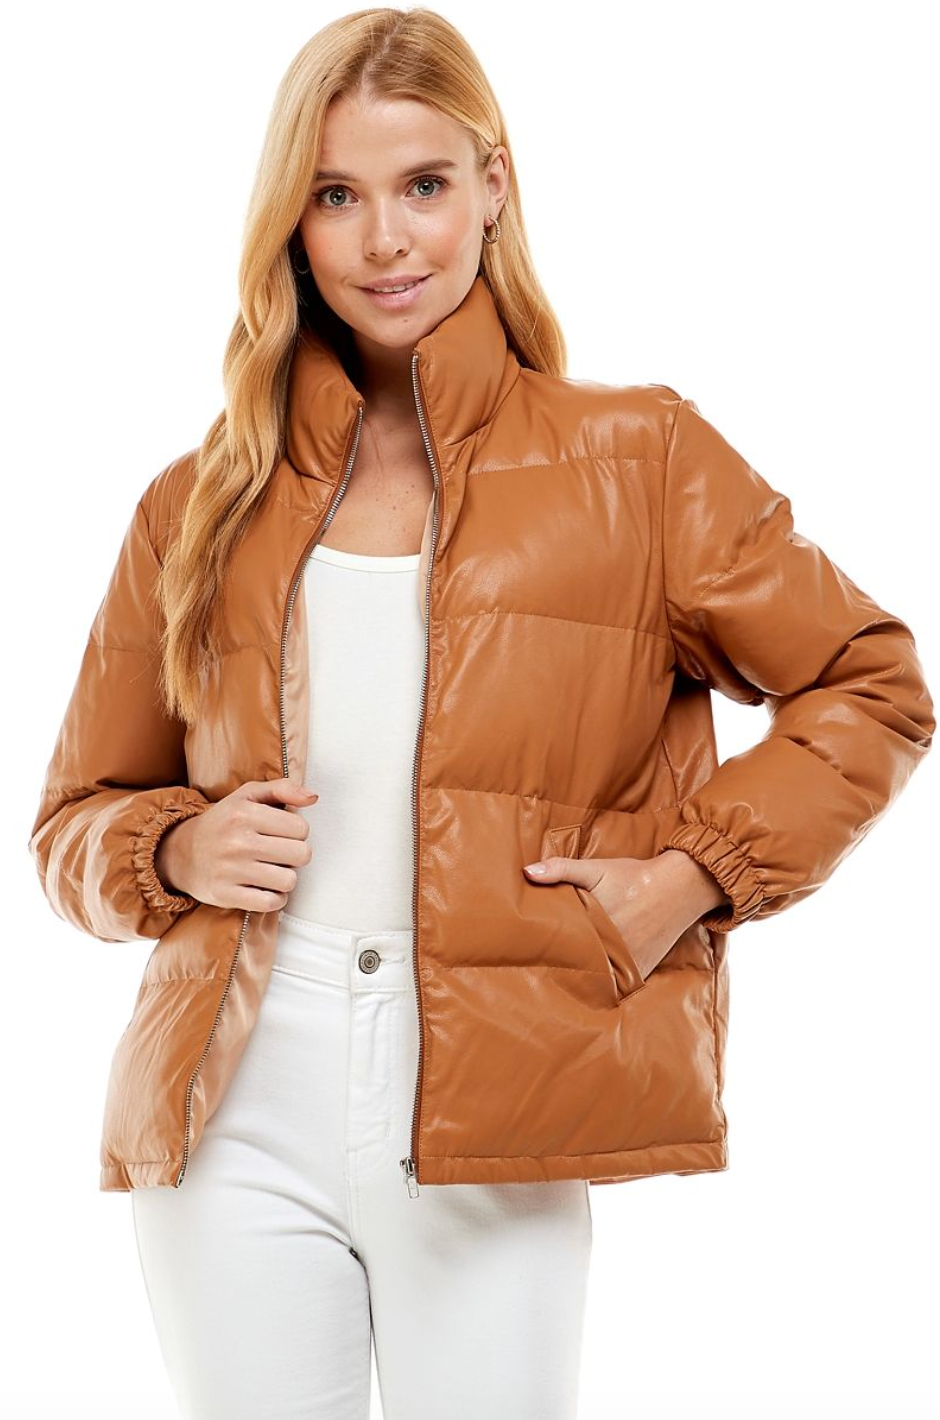 Leather Down Jacket (Brown & Tan)